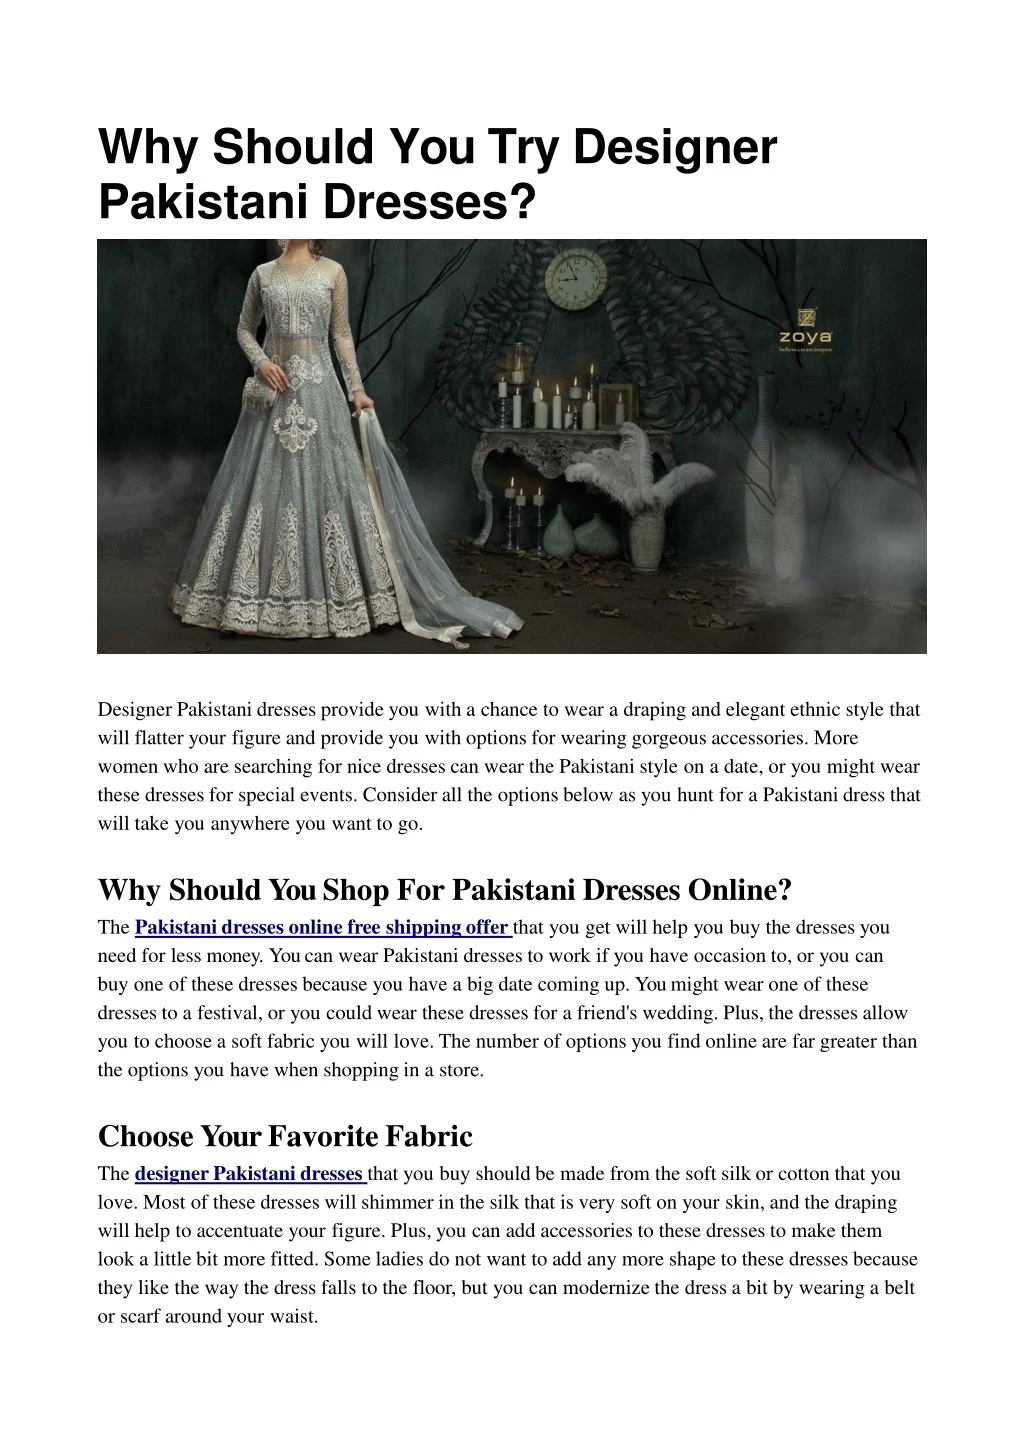 why should you try designer pakistani dresses